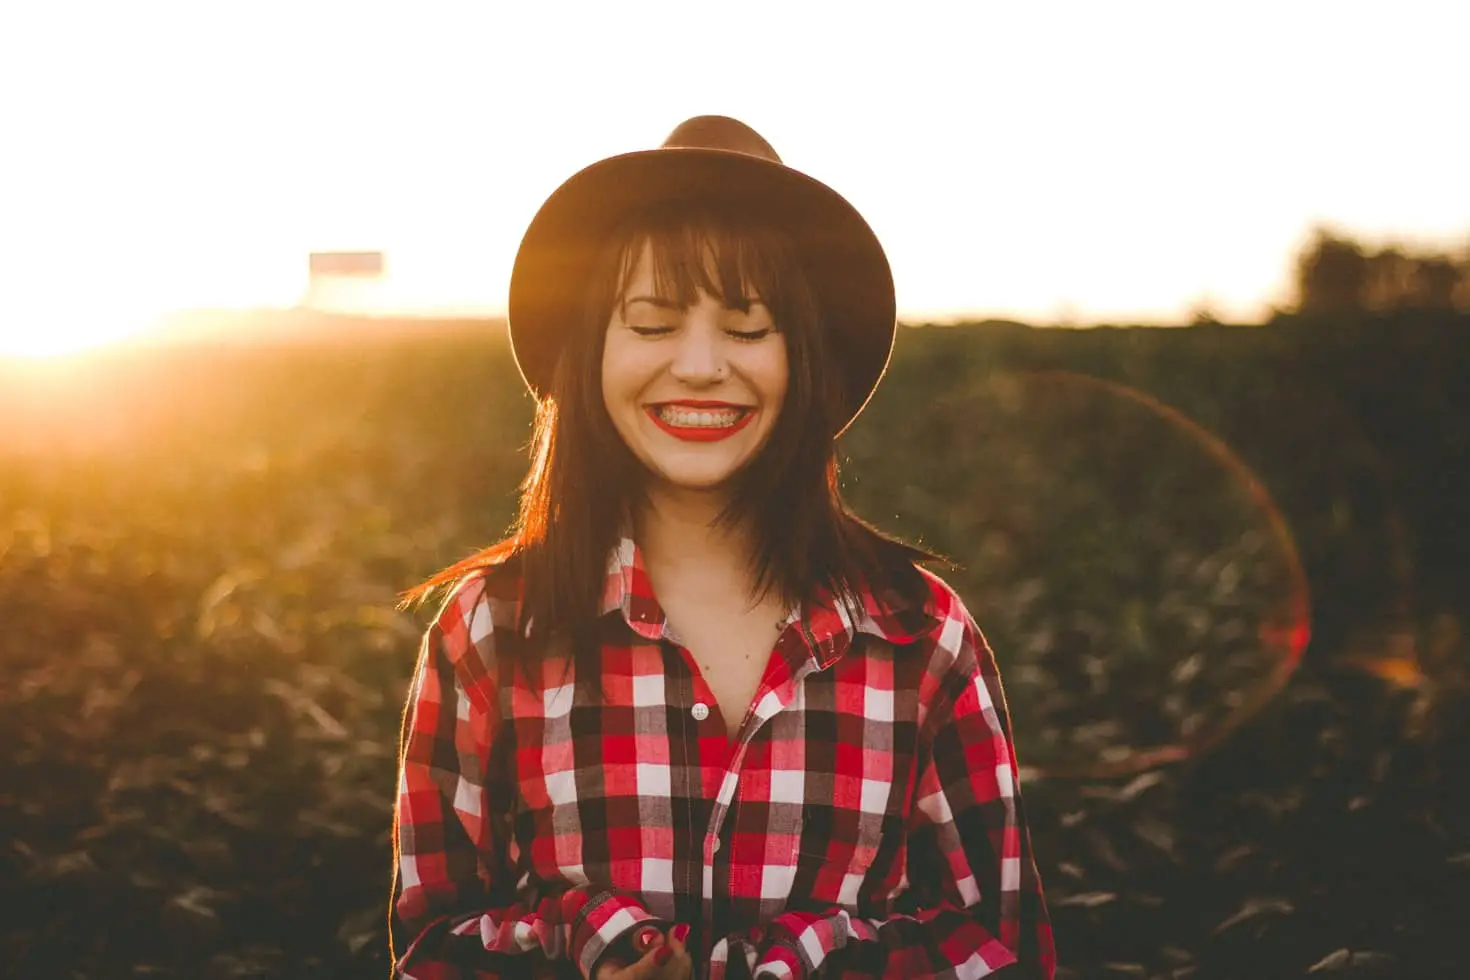 Woman standing in a field wearing a checked shirt and cowboy hat smiling